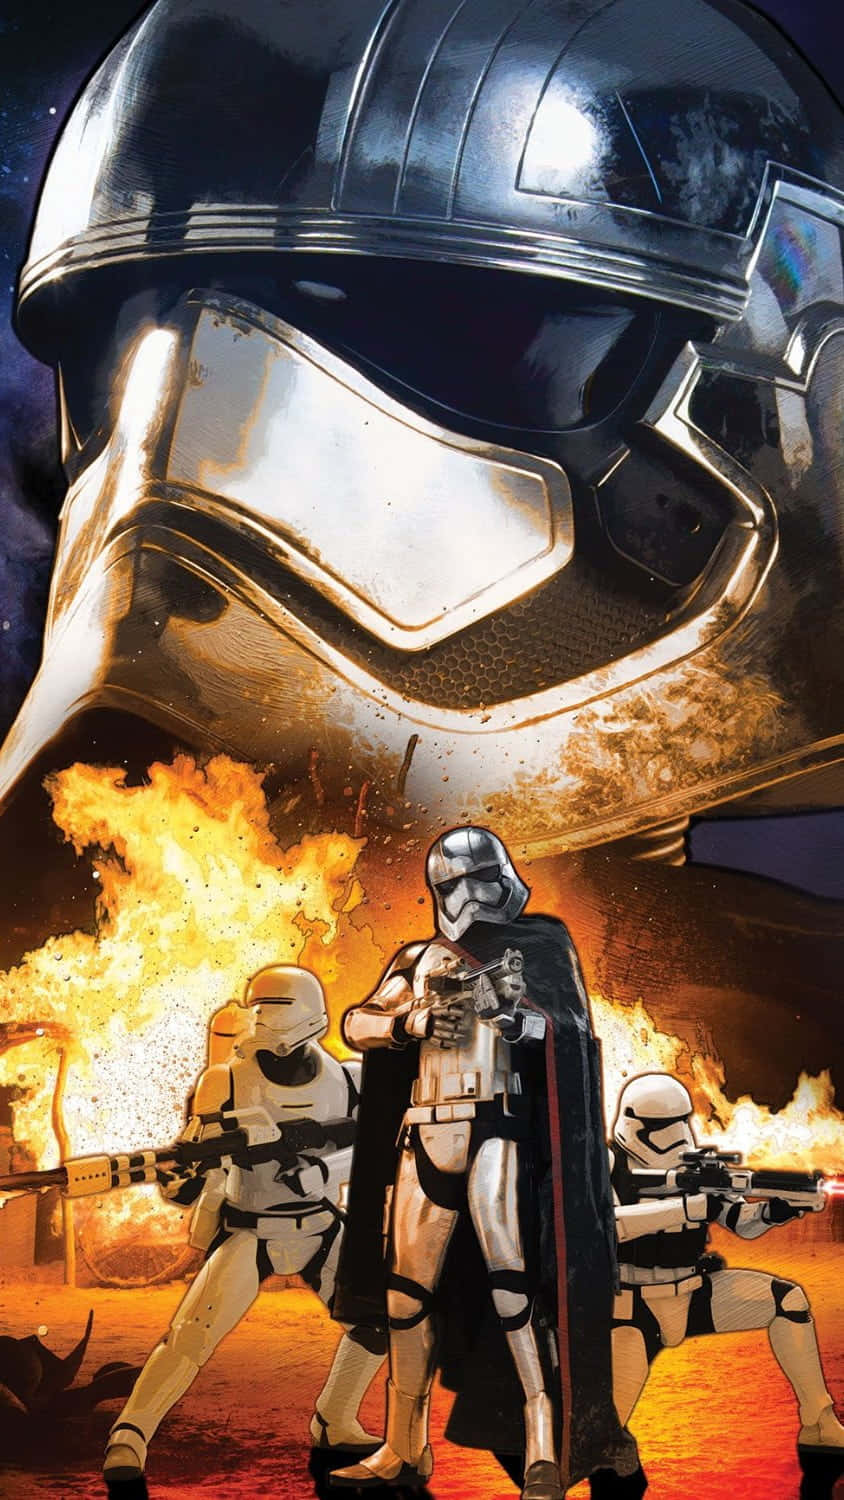 Captain Phasma - The First Order's Commander in Action Wallpaper